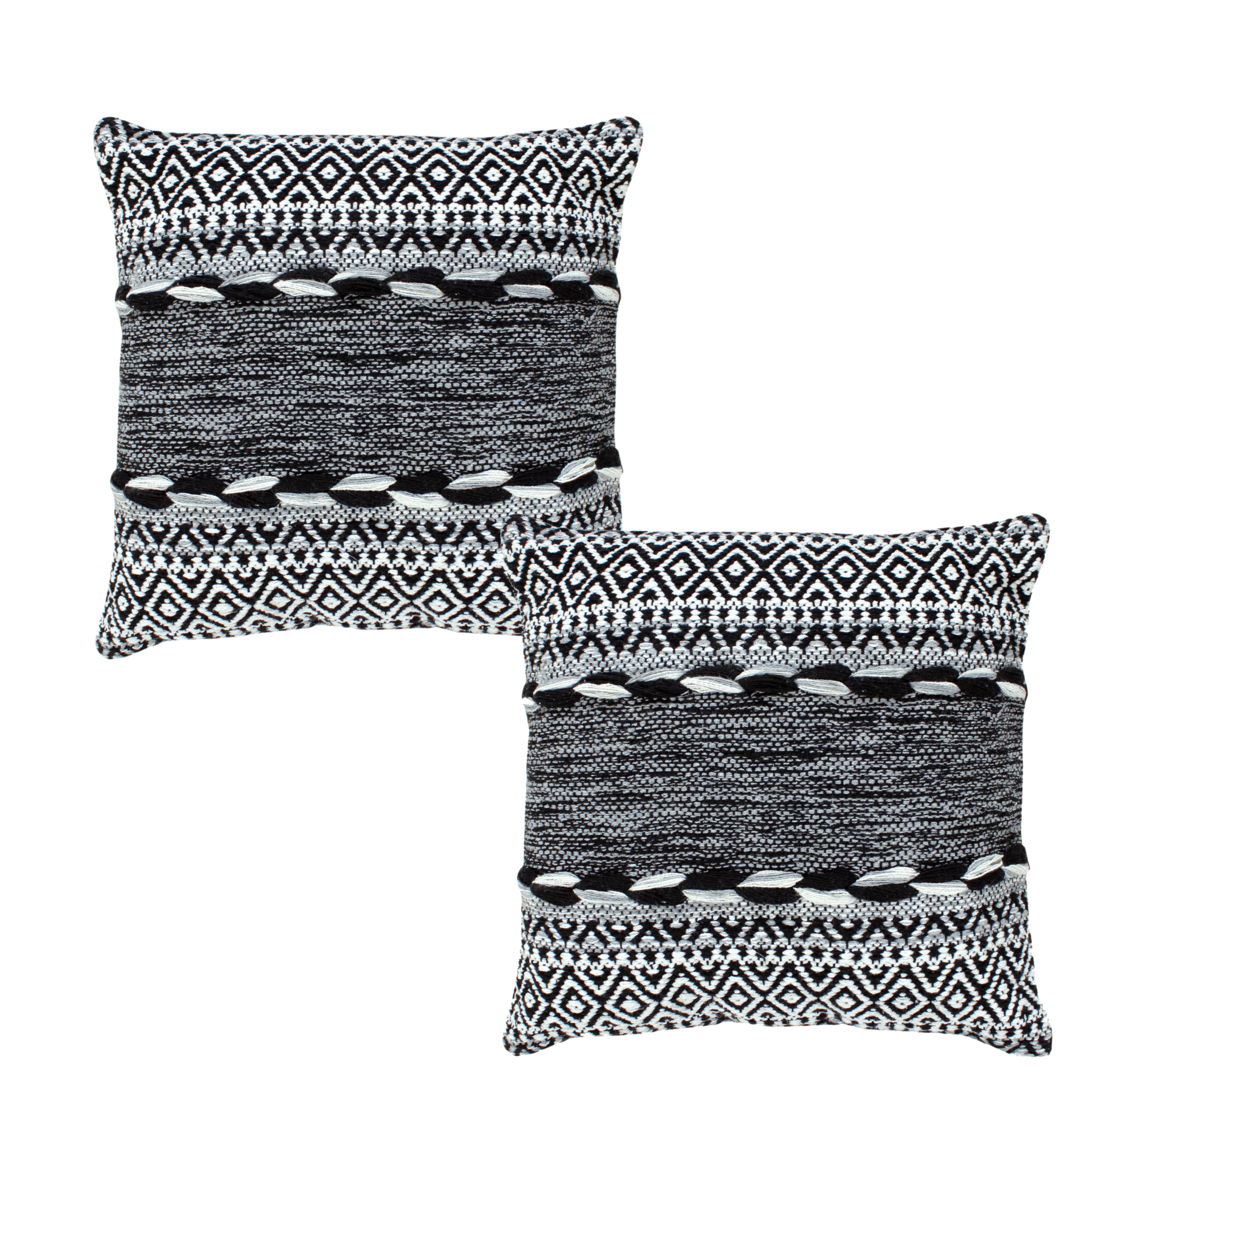 18 X 18 Jacquard Square Decorative Cotton Accent Throw Pillow With Soft Boho Tribal Pattern, Set Of 2, Black, White